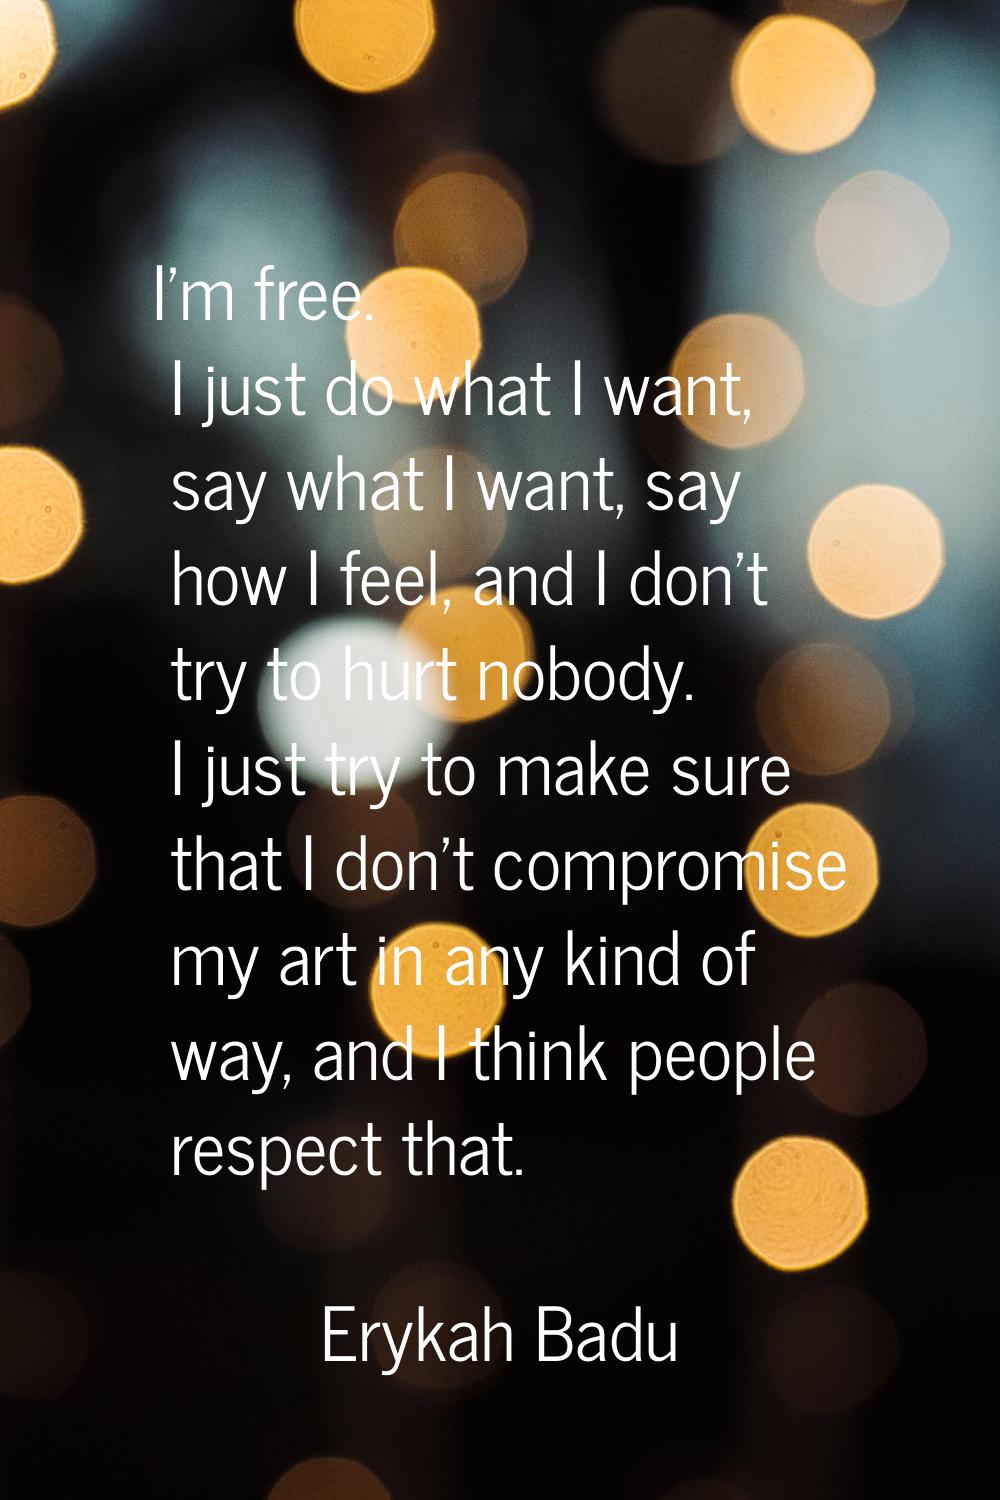 I'm free. I just do what I want, say what I want, say how I feel, and I don't try to hurt nobody. I